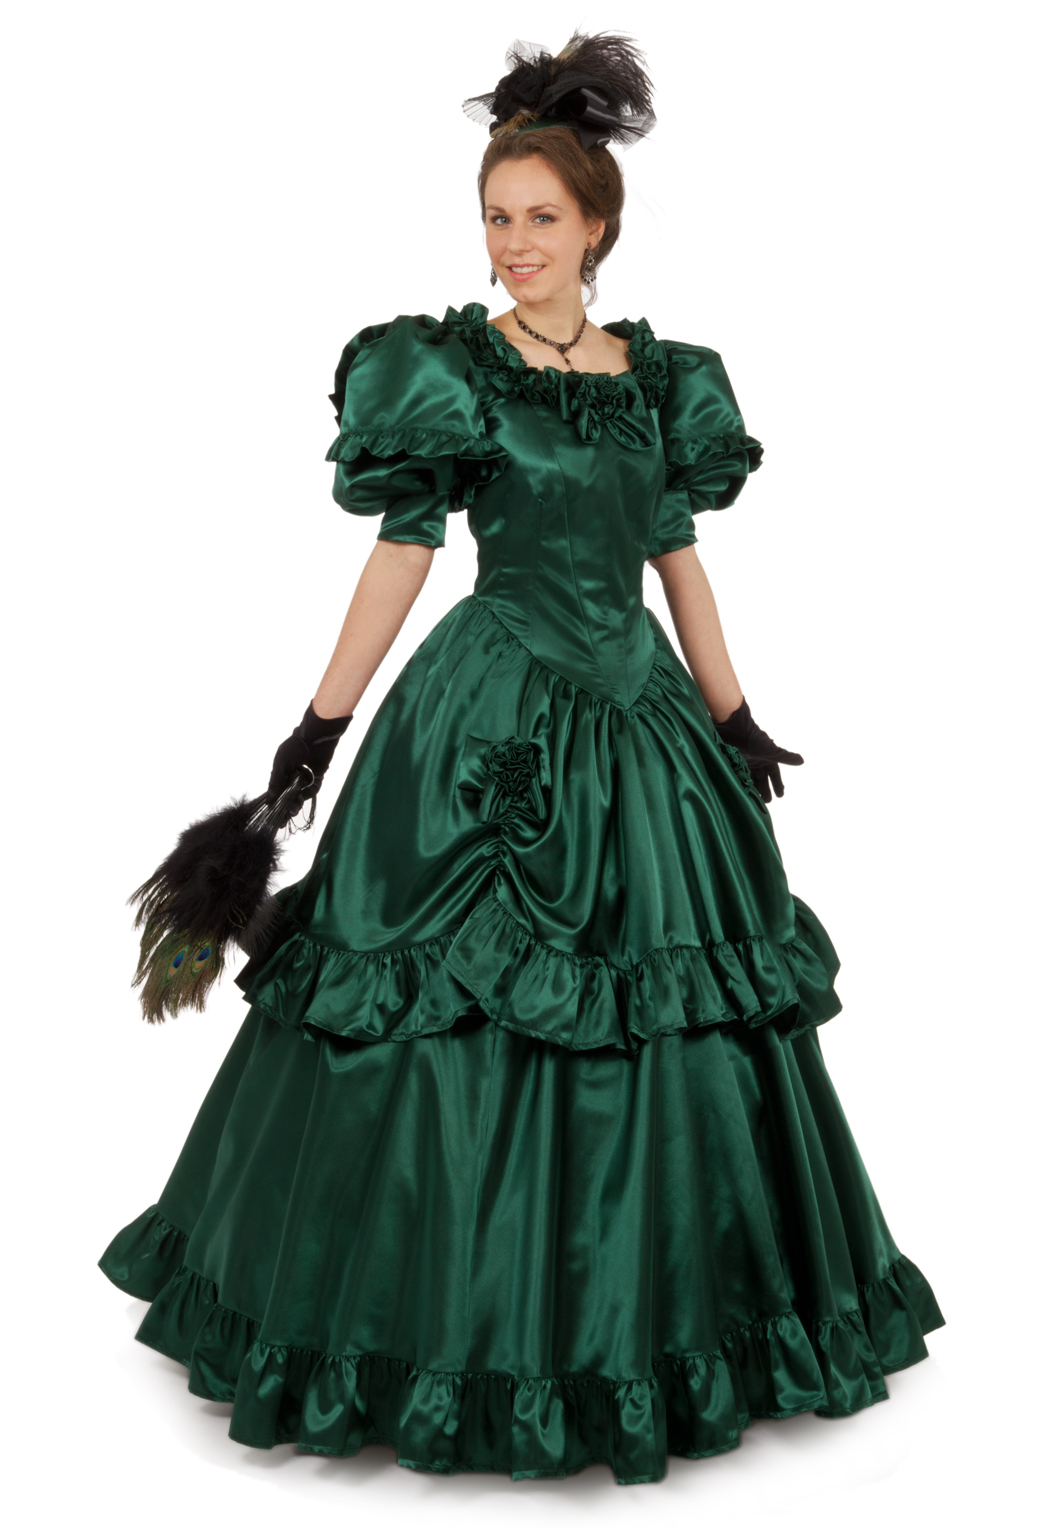 Magnolia Victorian Satin Ball Gown | Recollections